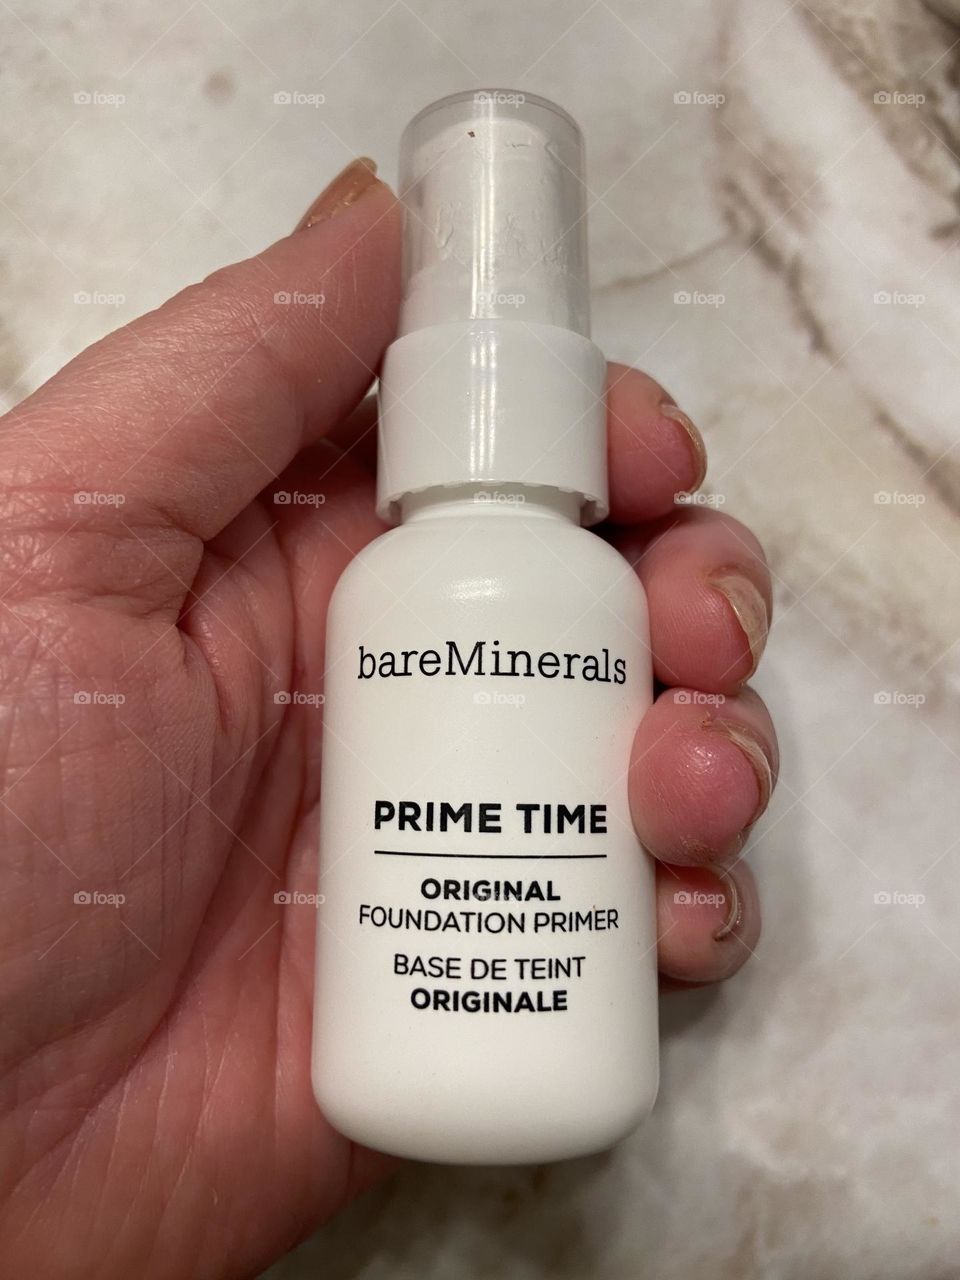 My hand holding Prime Time Original Foundation Primer from Bare Minerals. This product is the perfect base layer to use with Bare Minerals Original Foundation. It is light and you don’t need to use a lot. 